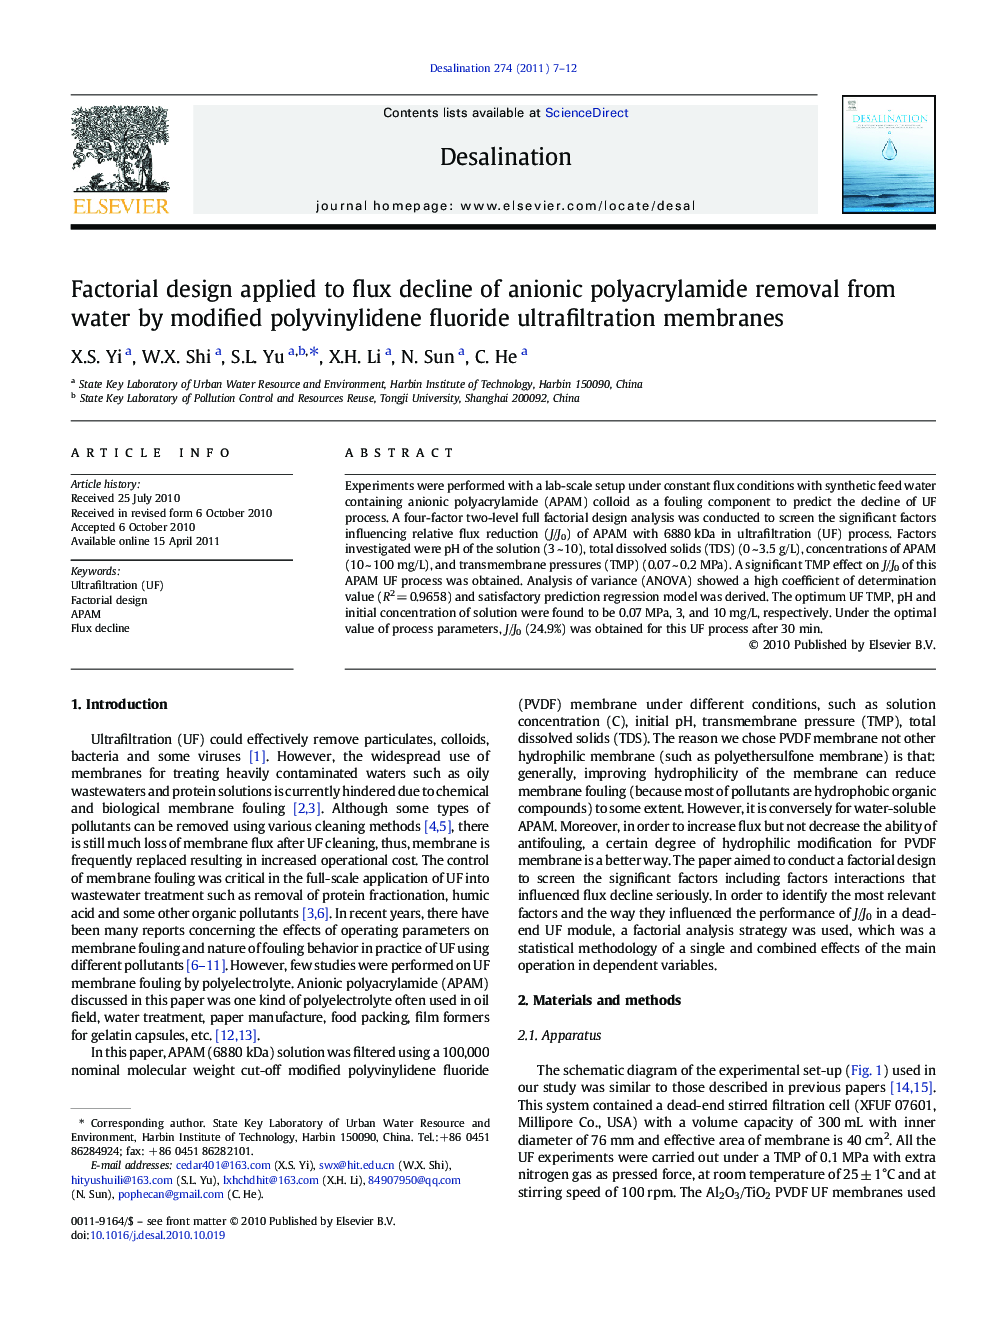 Factorial design applied to flux decline of anionic polyacrylamide removal from water by modified polyvinylidene fluoride ultrafiltration membranes